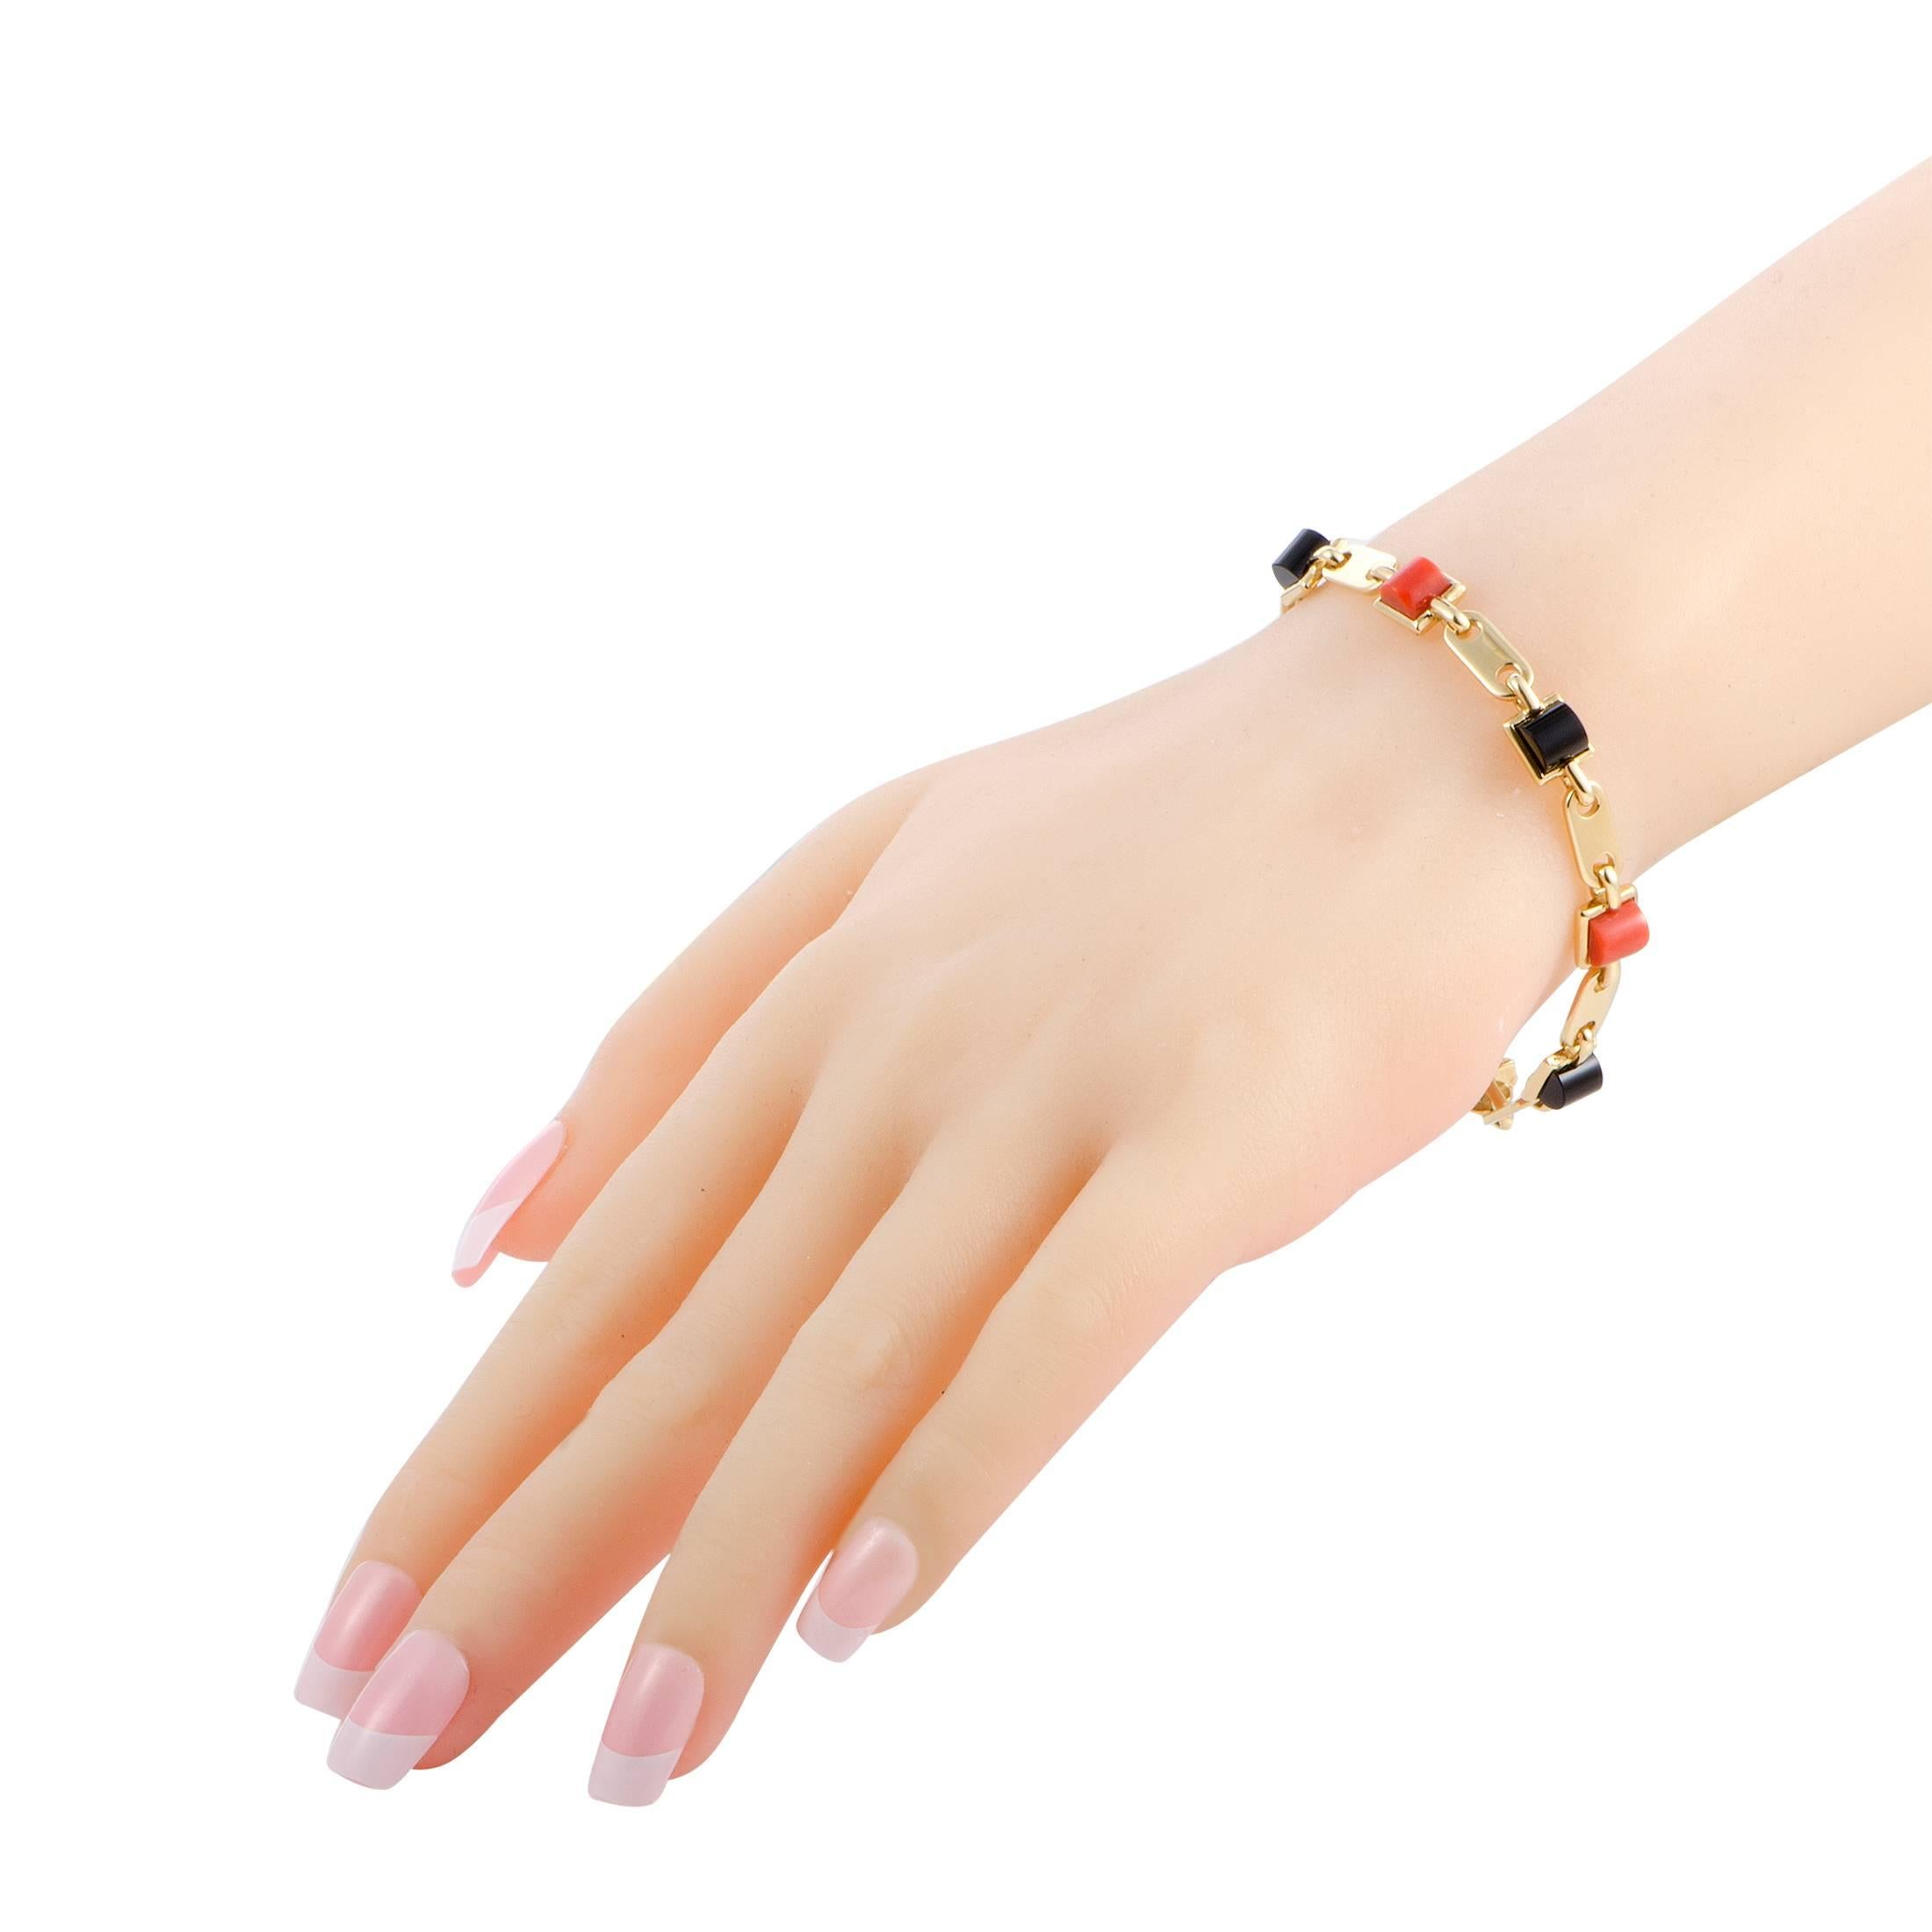 The striking beauty of coral and onyx stones is splendidly brought out in this bracelet by the luxurious sheen of 18K yellow gold. The bracelet is a Cartier design and weighs 21.1 grams.
Included Items: Manufacturer's Box